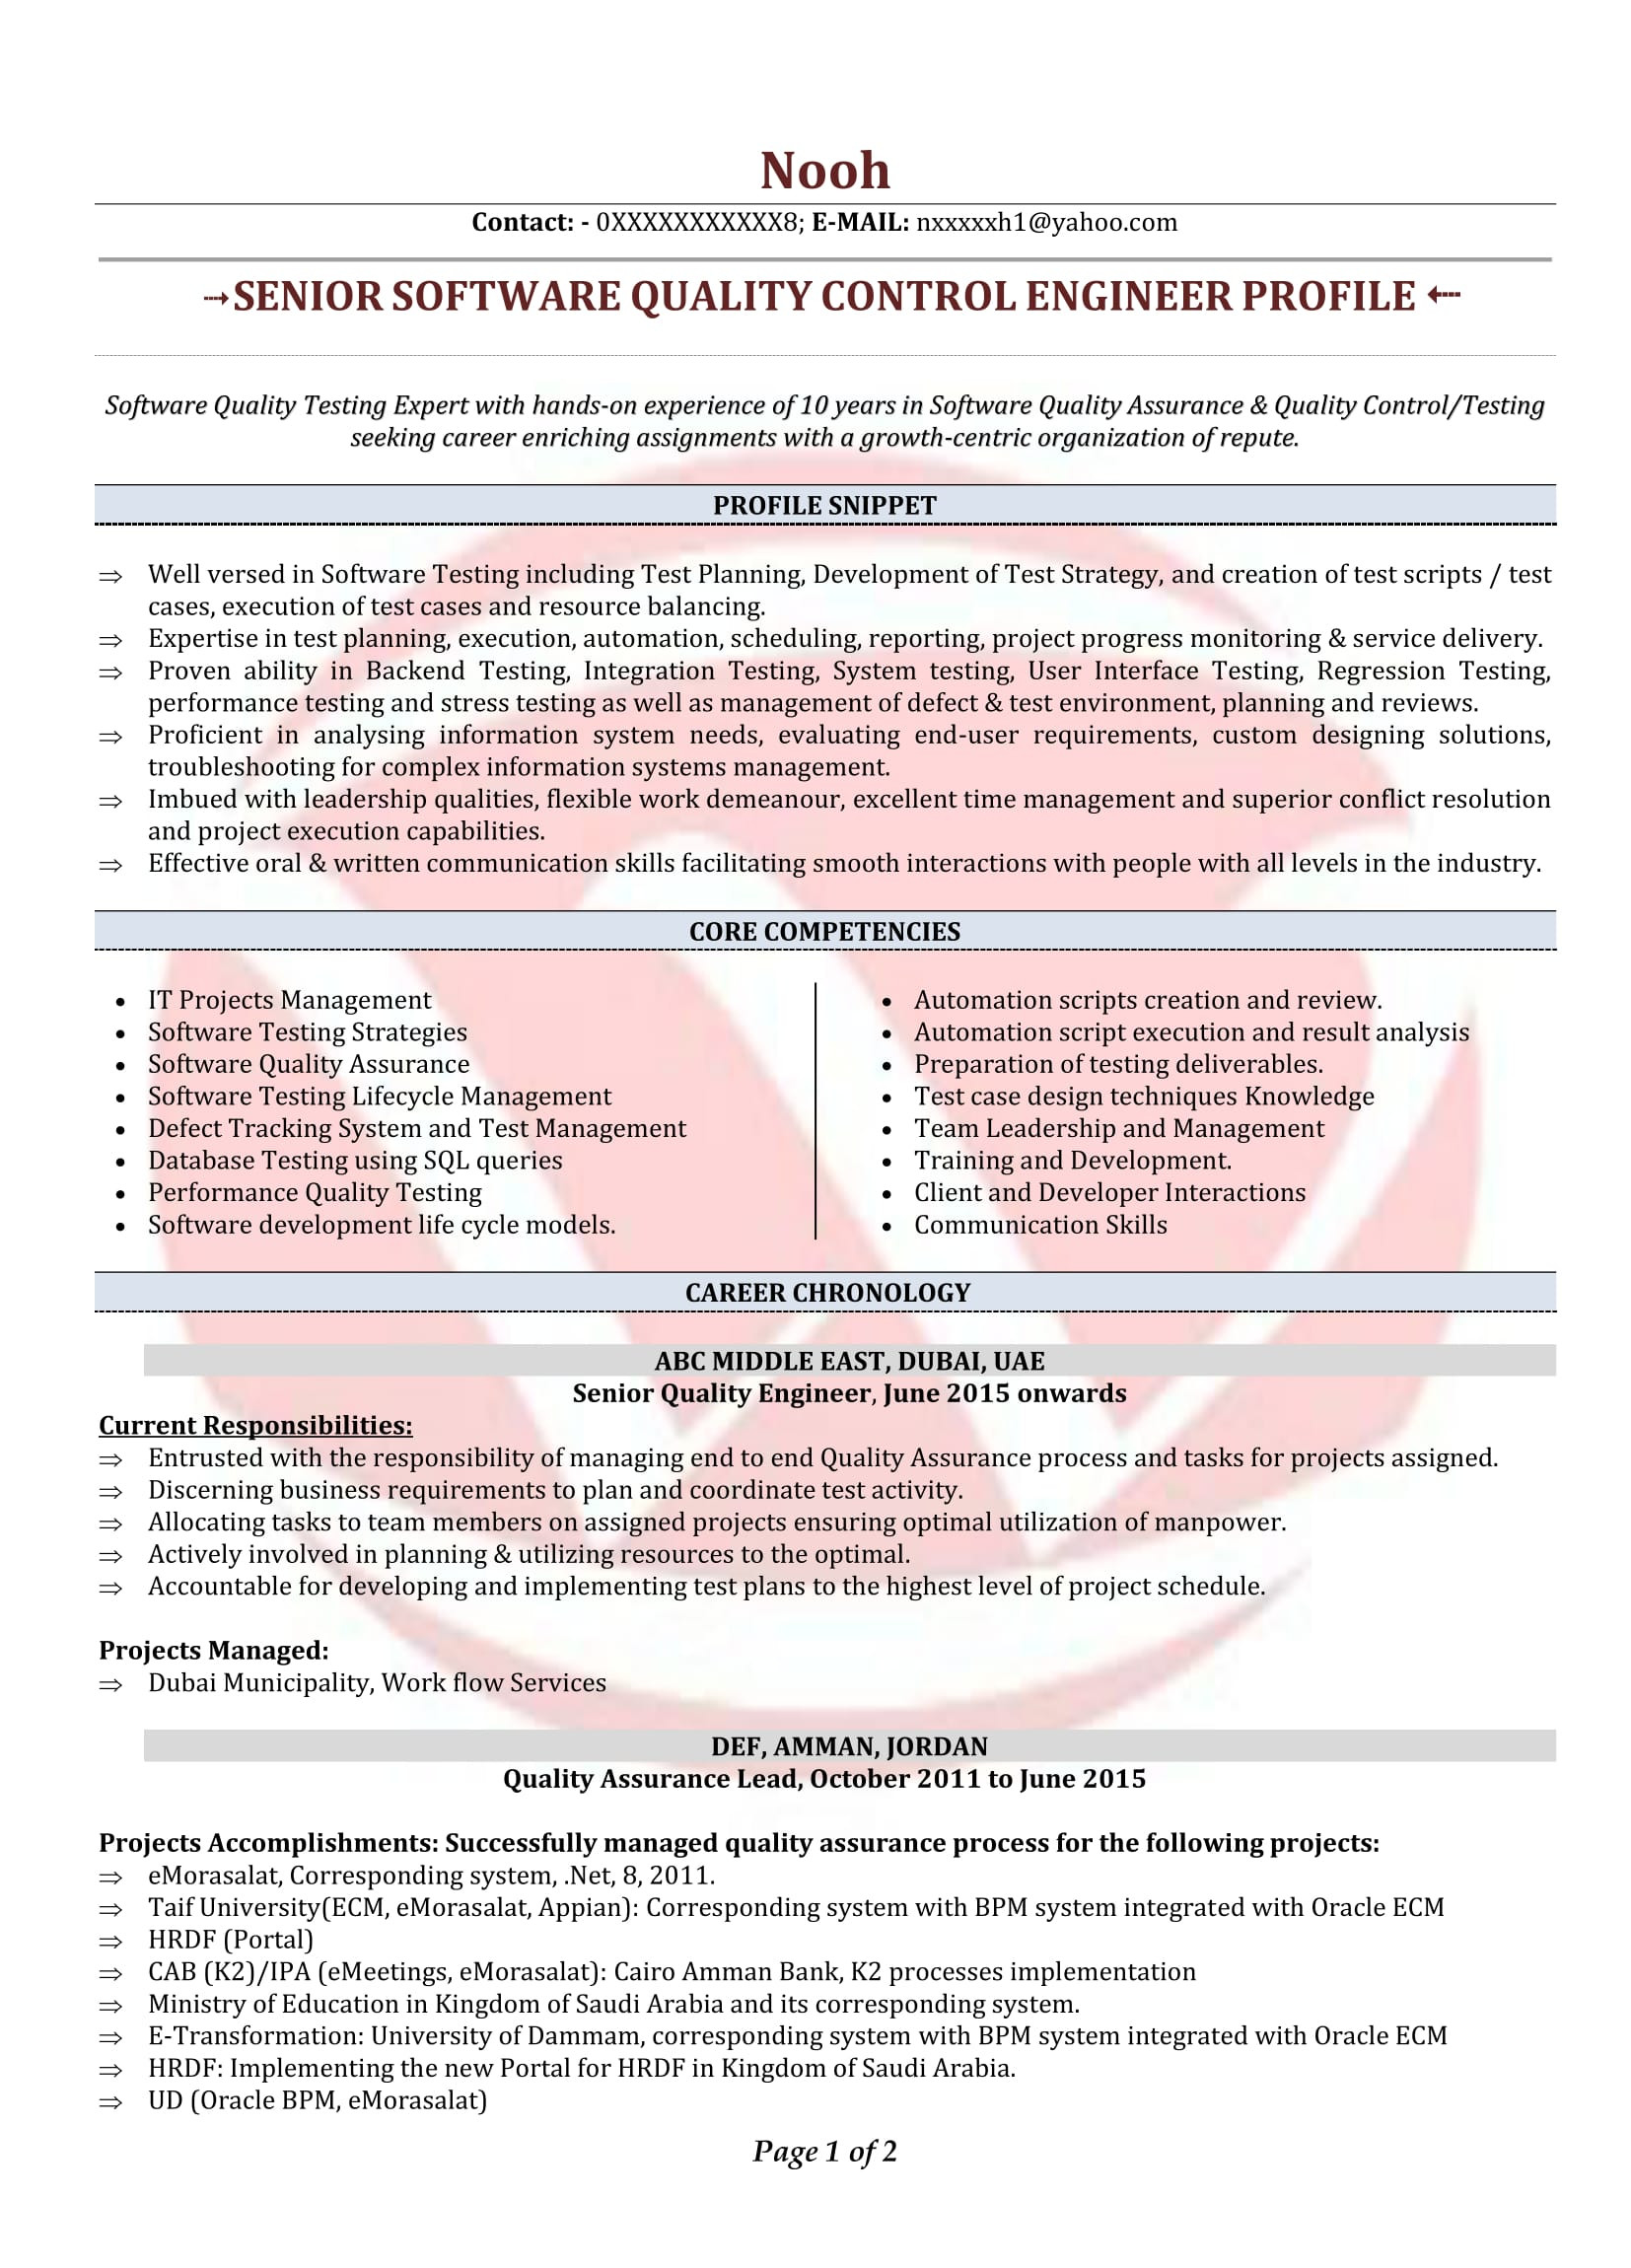 Sample Resume for Quality Engineer In Automobile Pdf Quality Engineer Sample Resumes, Download Resume format Templates!